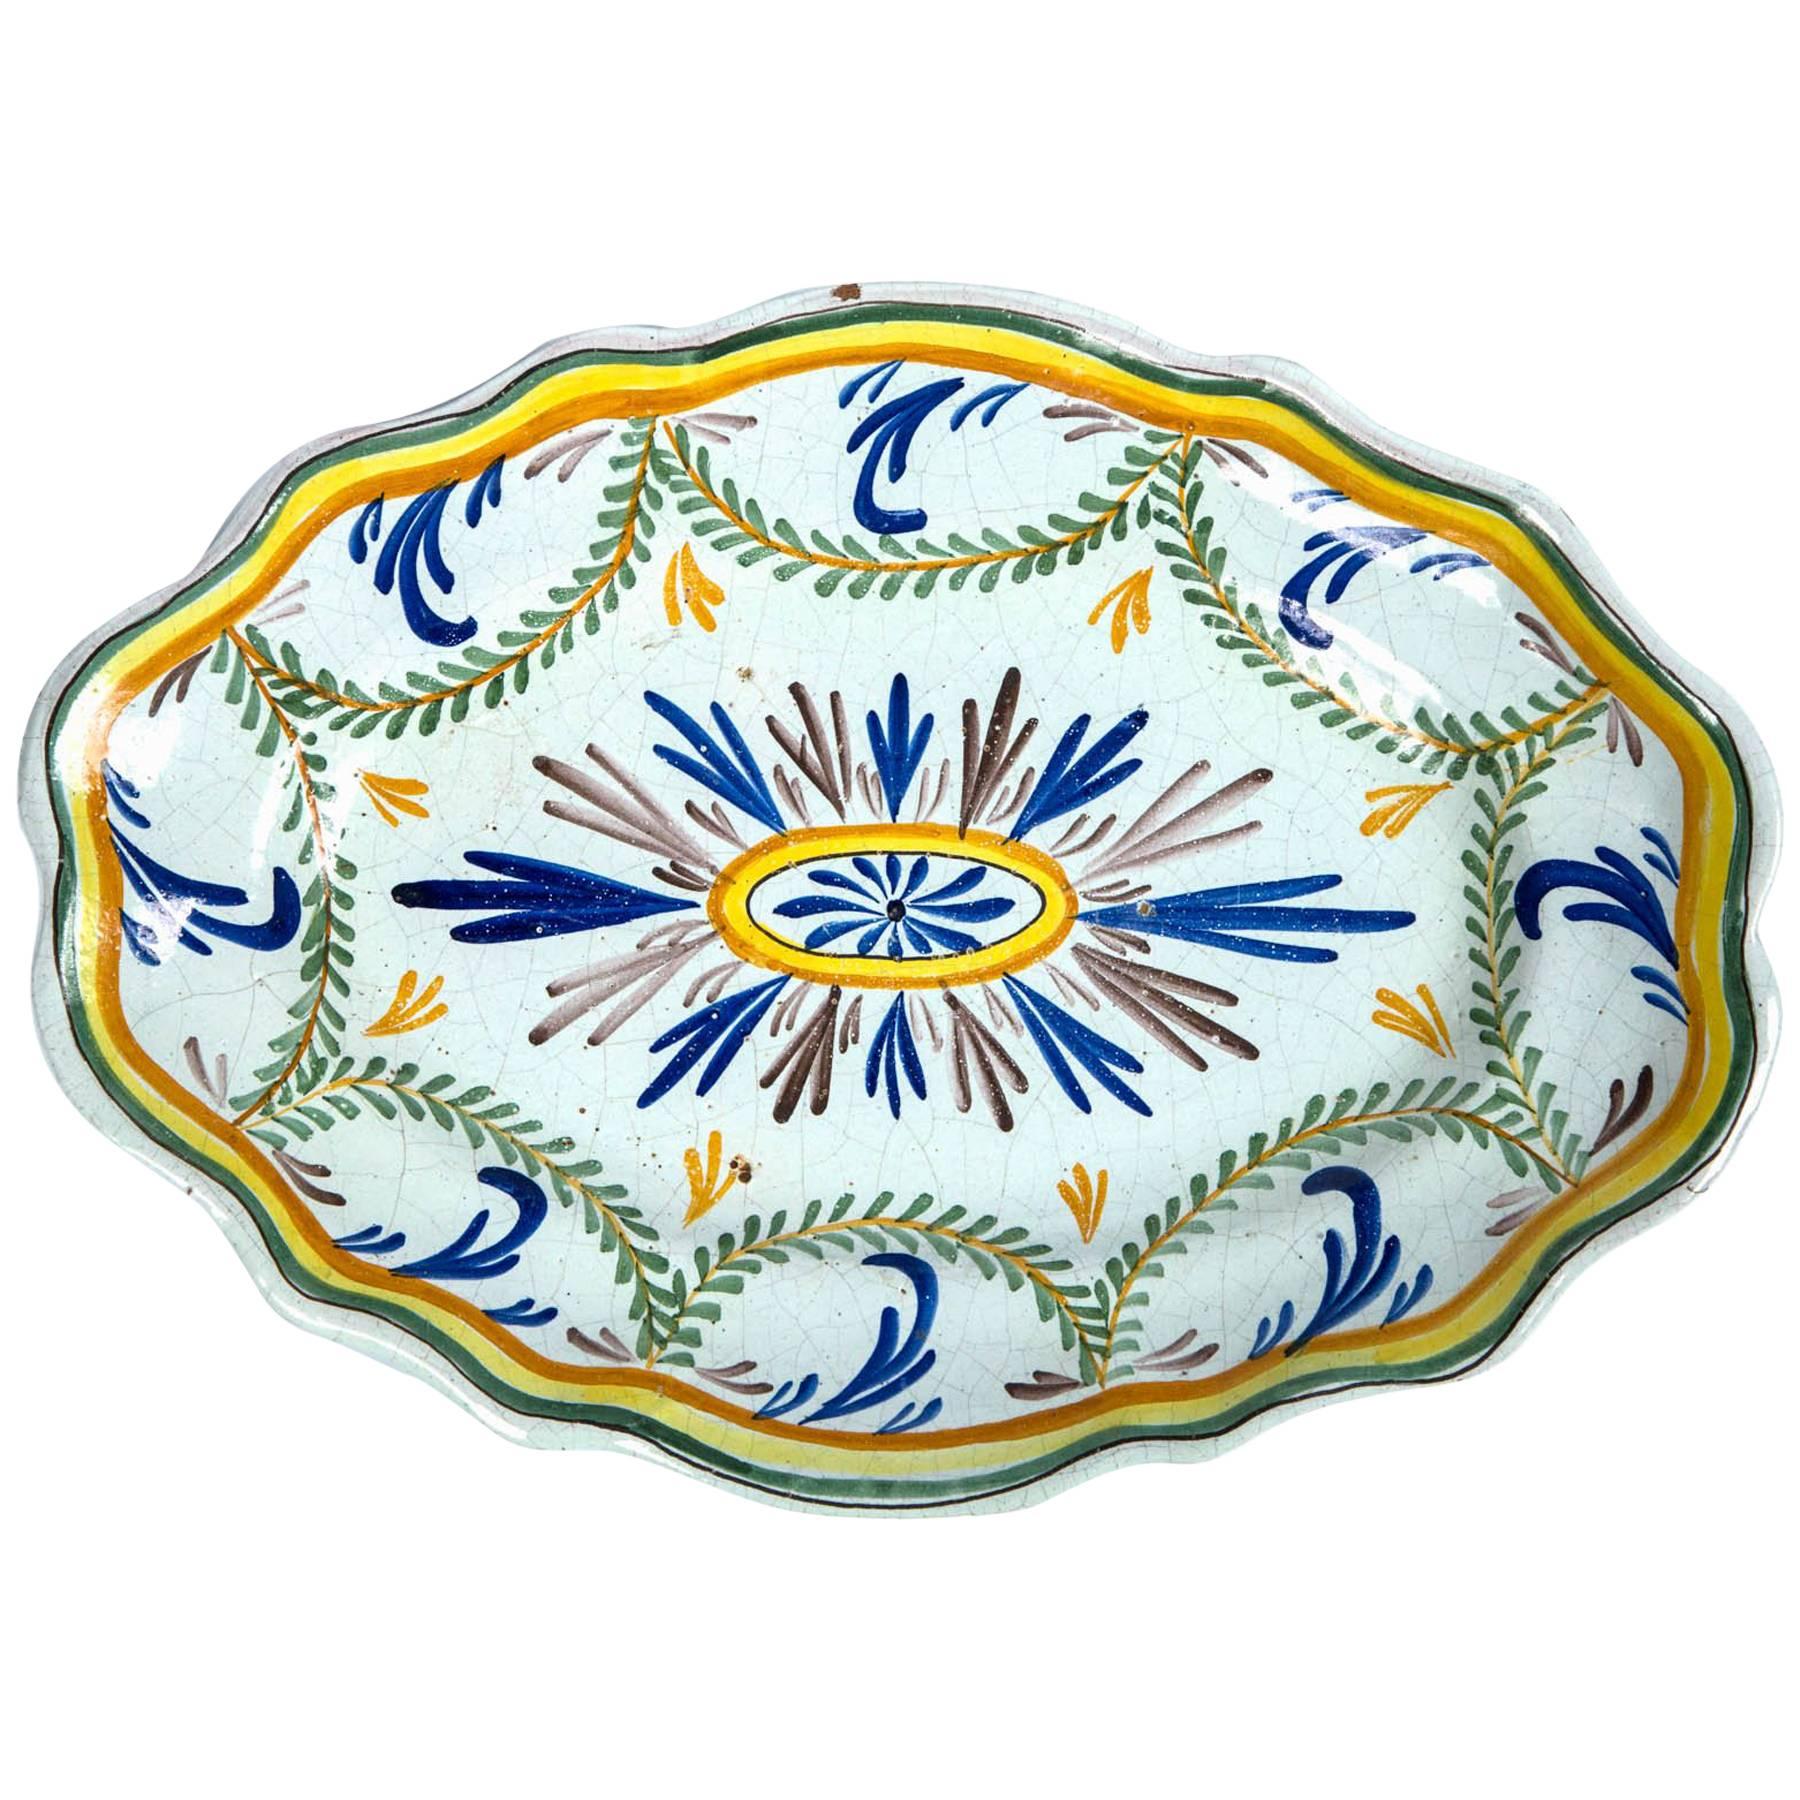 French Faience Platter, Late 19th Century